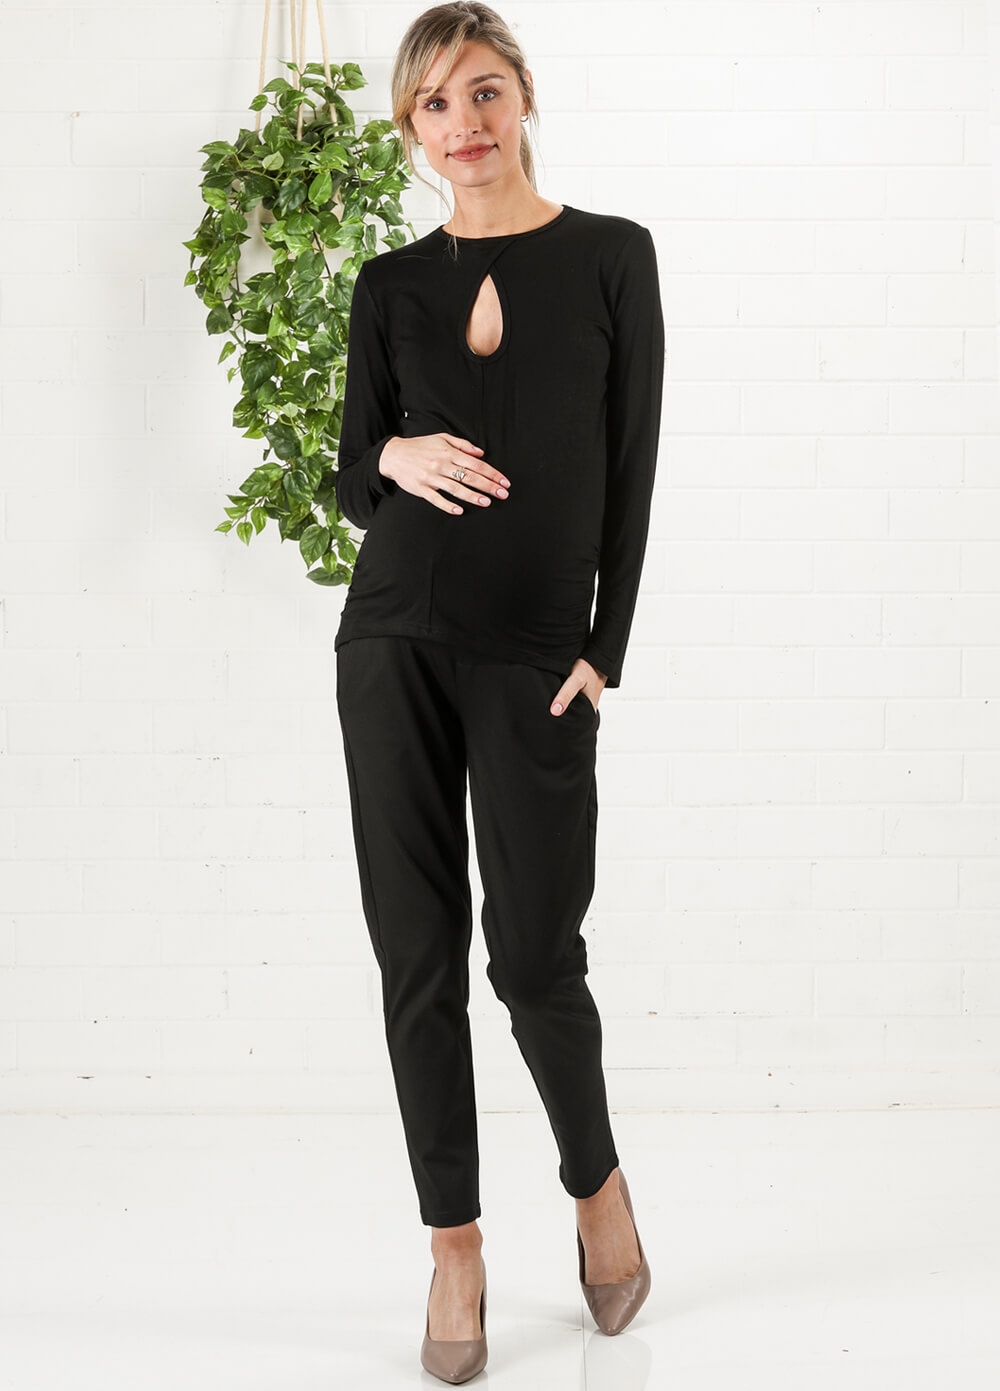 Lait & Co - Blaye Keyhole Maternity Top in Black | Queen Bee